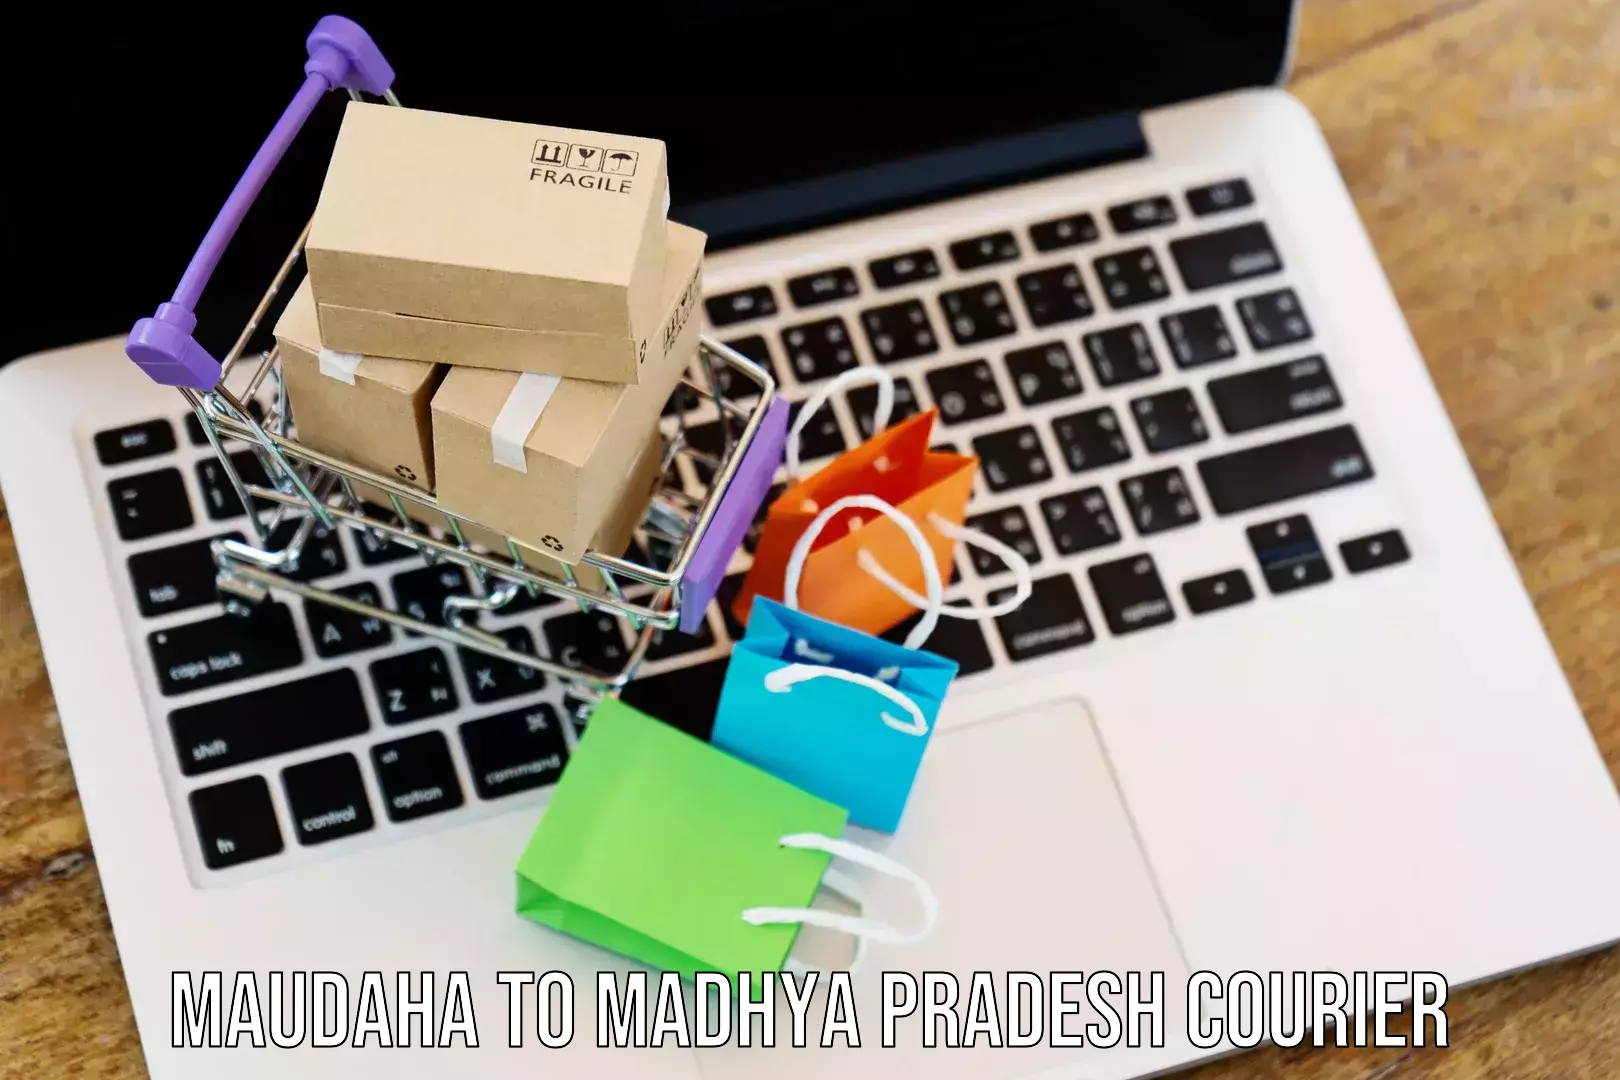 User-friendly delivery service Maudaha to Chanderi